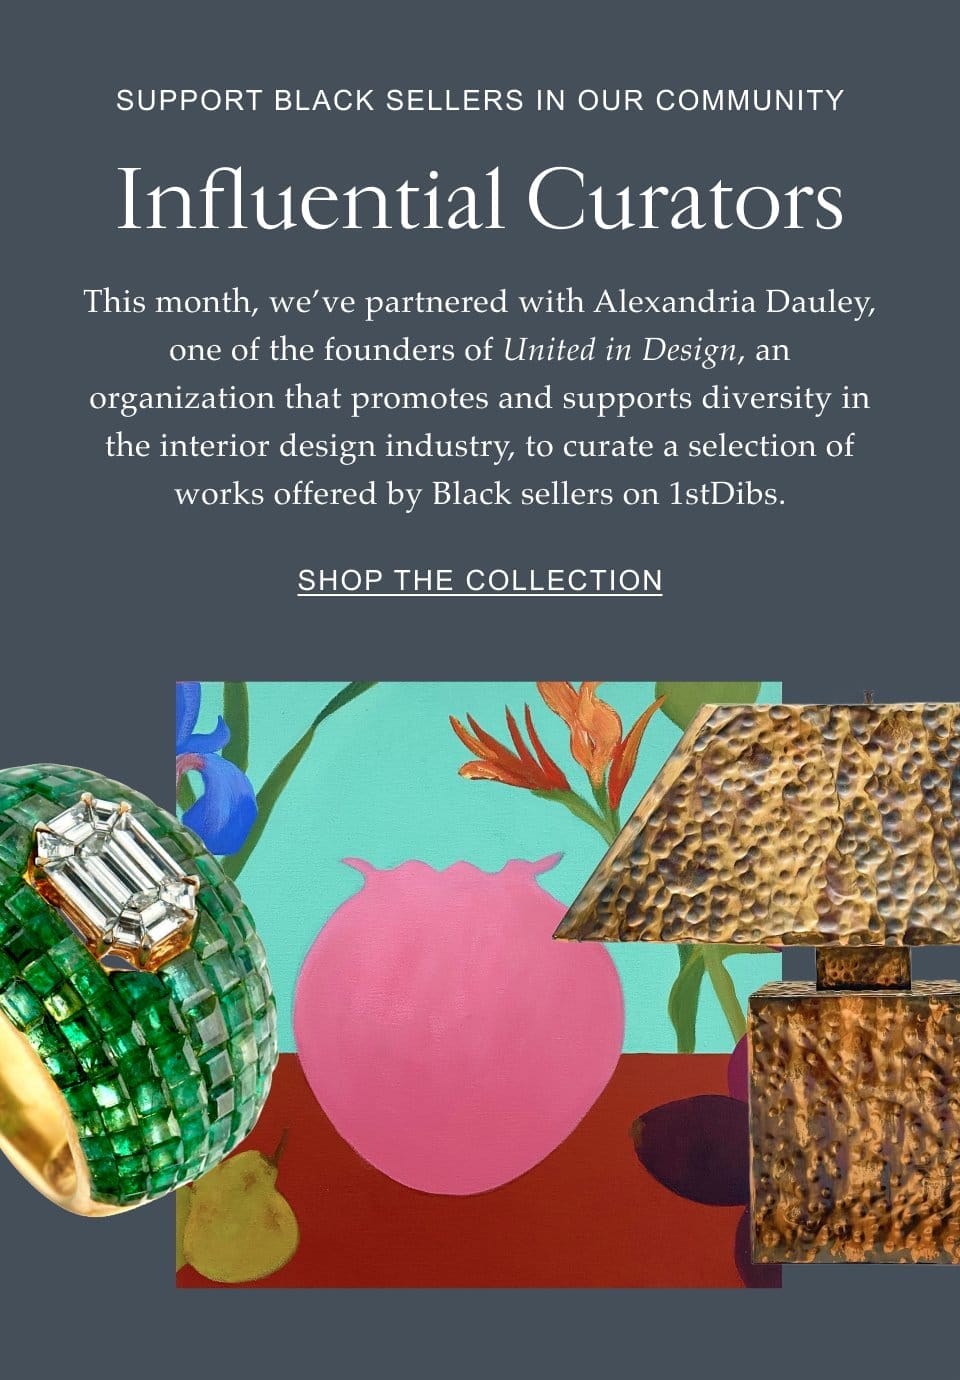 Support Black Sellers in Our Community Influential Curators This month, we’ve partnered with Alexandria Dauley, one of the founders of United in Design, an organization that promotes and supports diversity in the interior design industry, to curate a selection of works offered by Black sellers on 1stDibs.